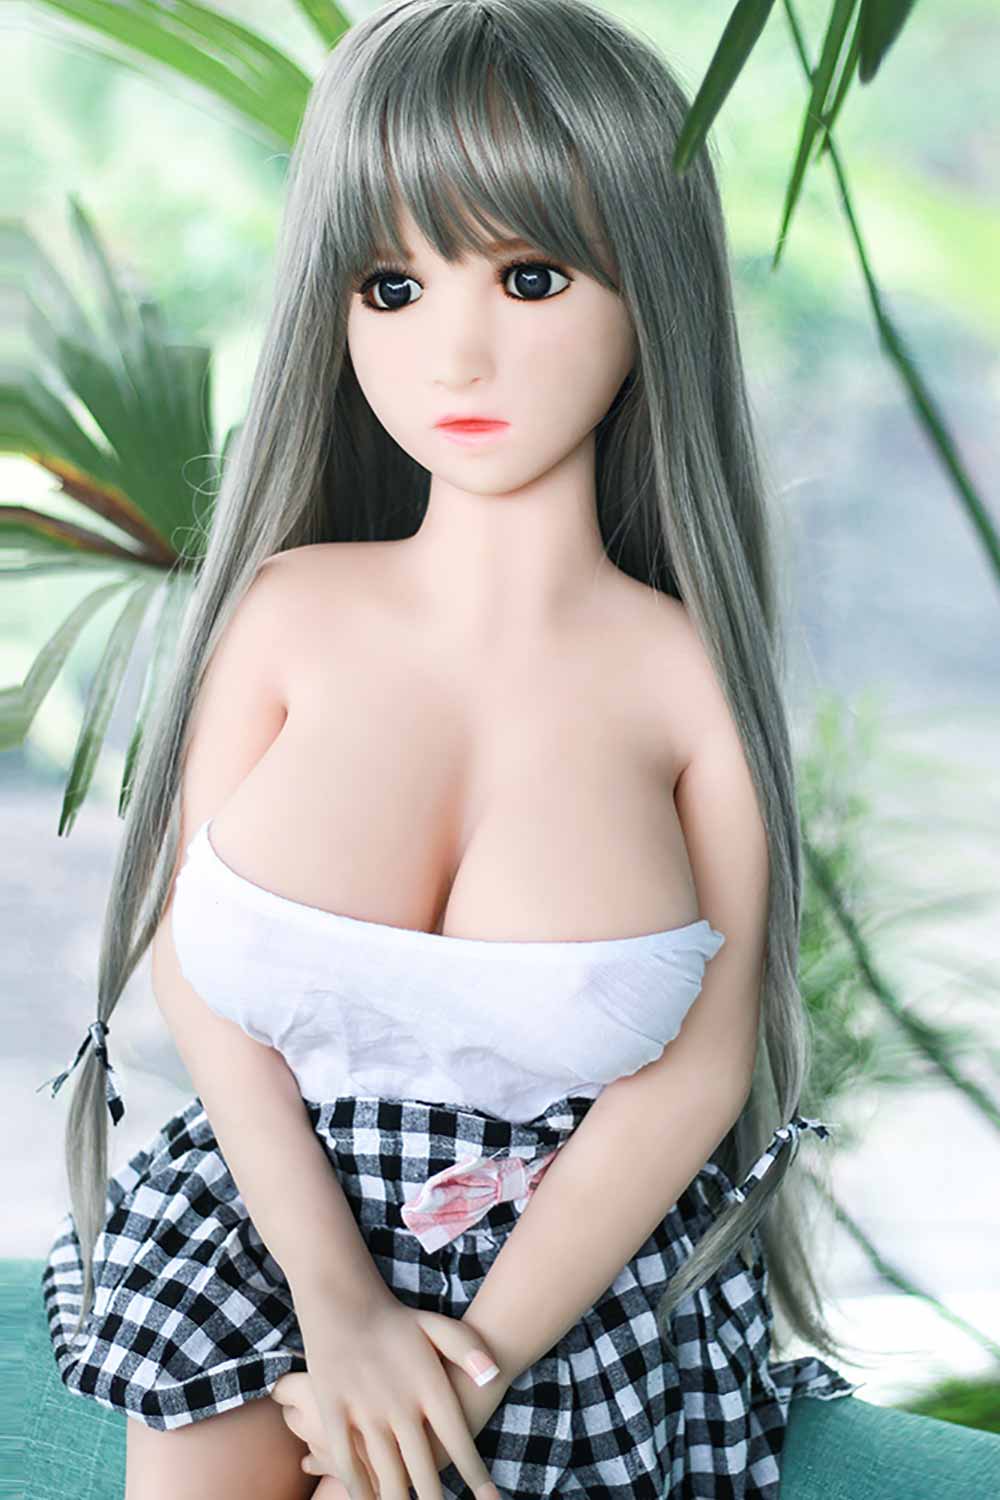 Mini sex doll with hands put together on the lower body